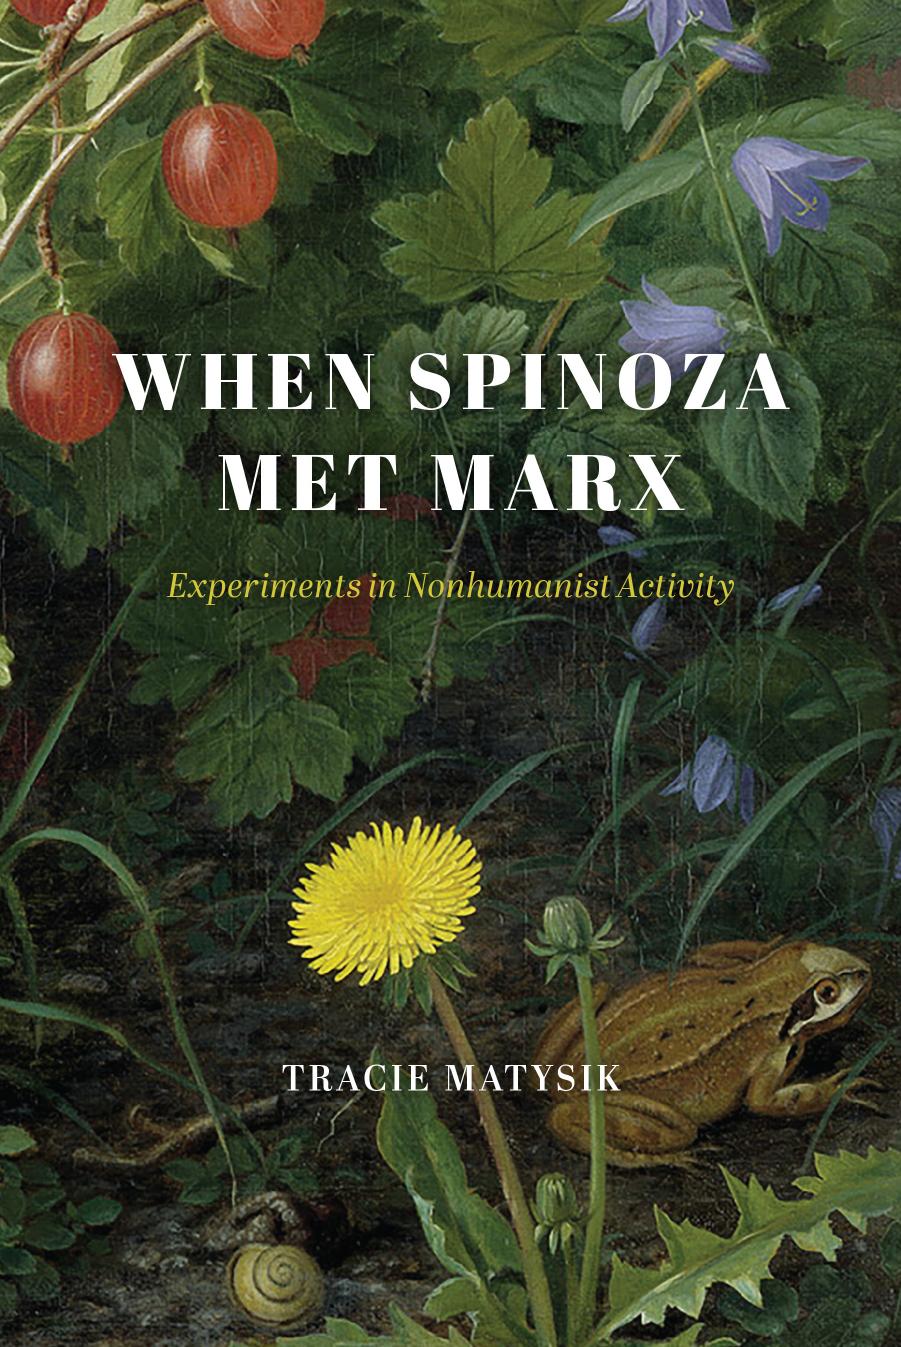 When Spinoza Met Marx: Experiments in Nonhumanist Activity by Tracie Matysik